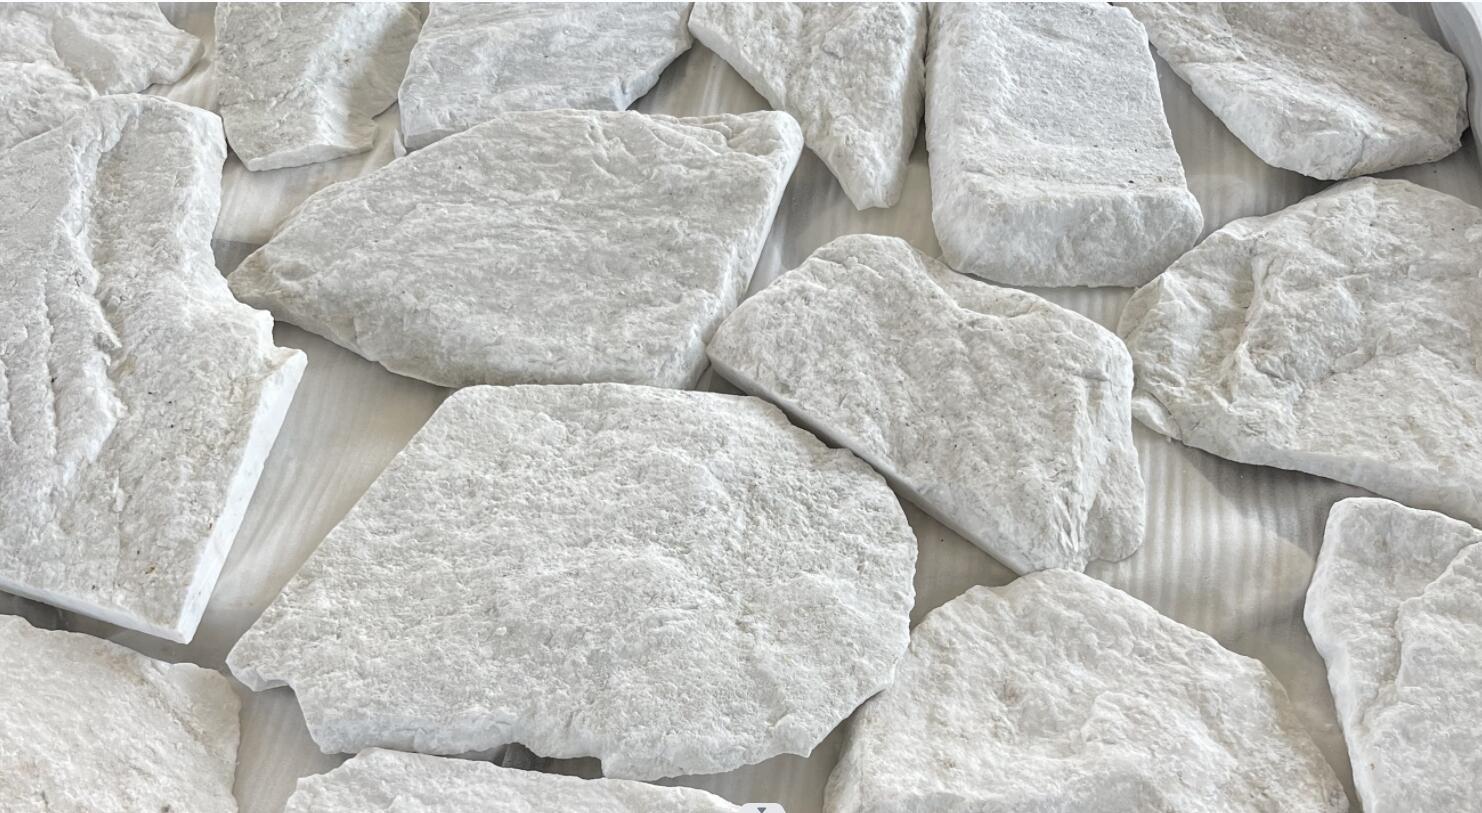 https://cdn.exportstart.com/nature stone adds elegance and value to outdoor areas